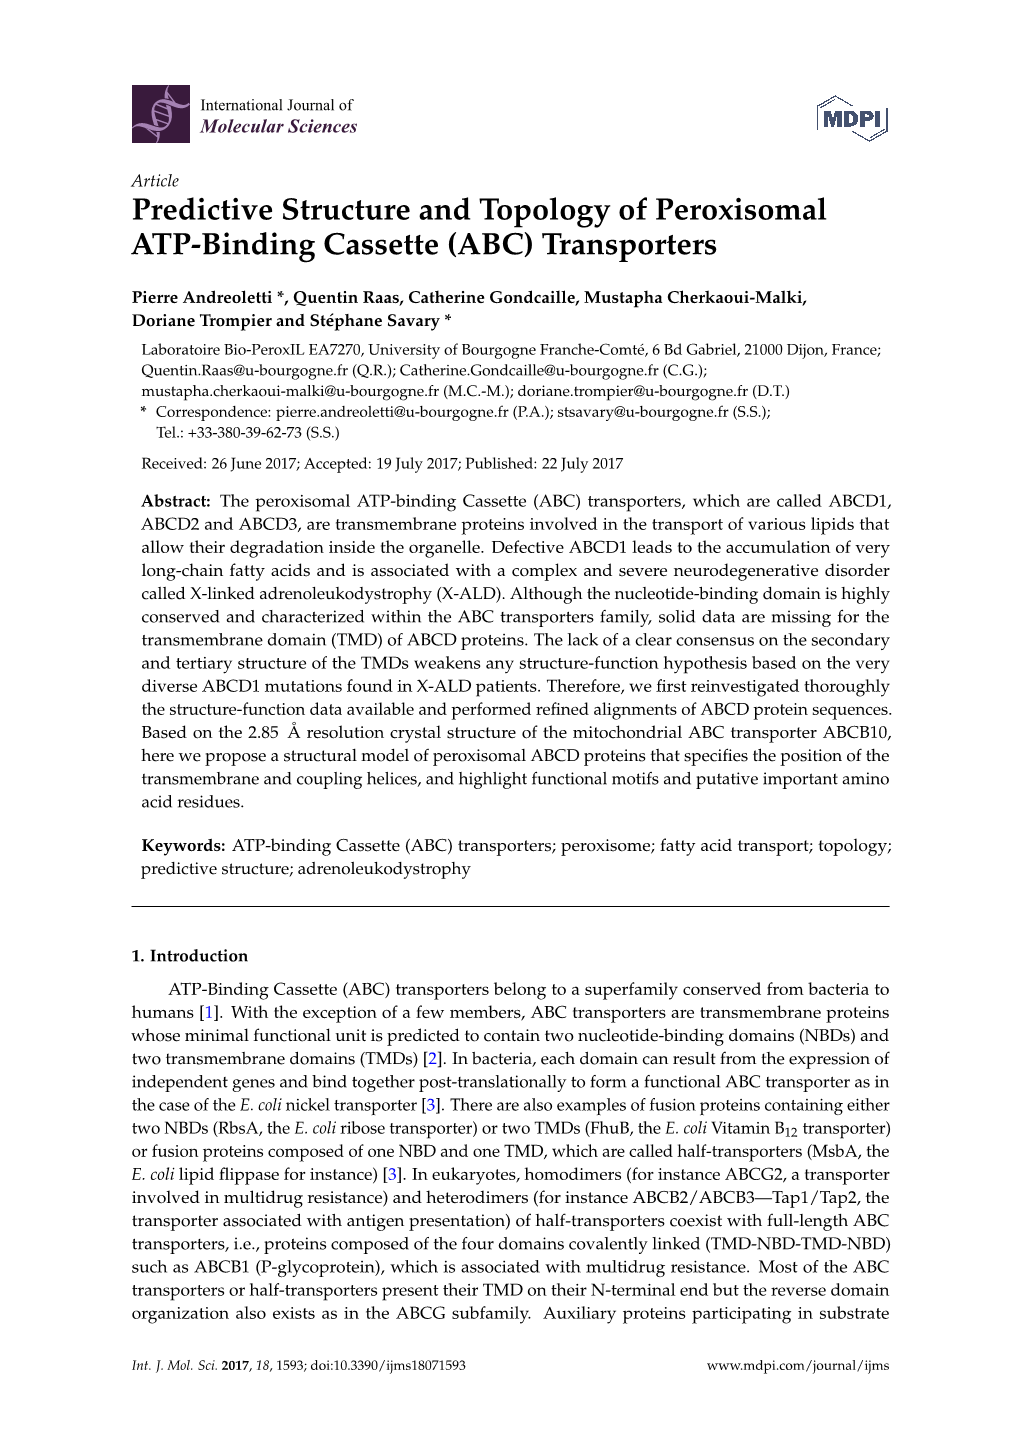 Predictive Structure and Topology of Peroxisomal ATP-Binding Cassette (ABC) Transporters